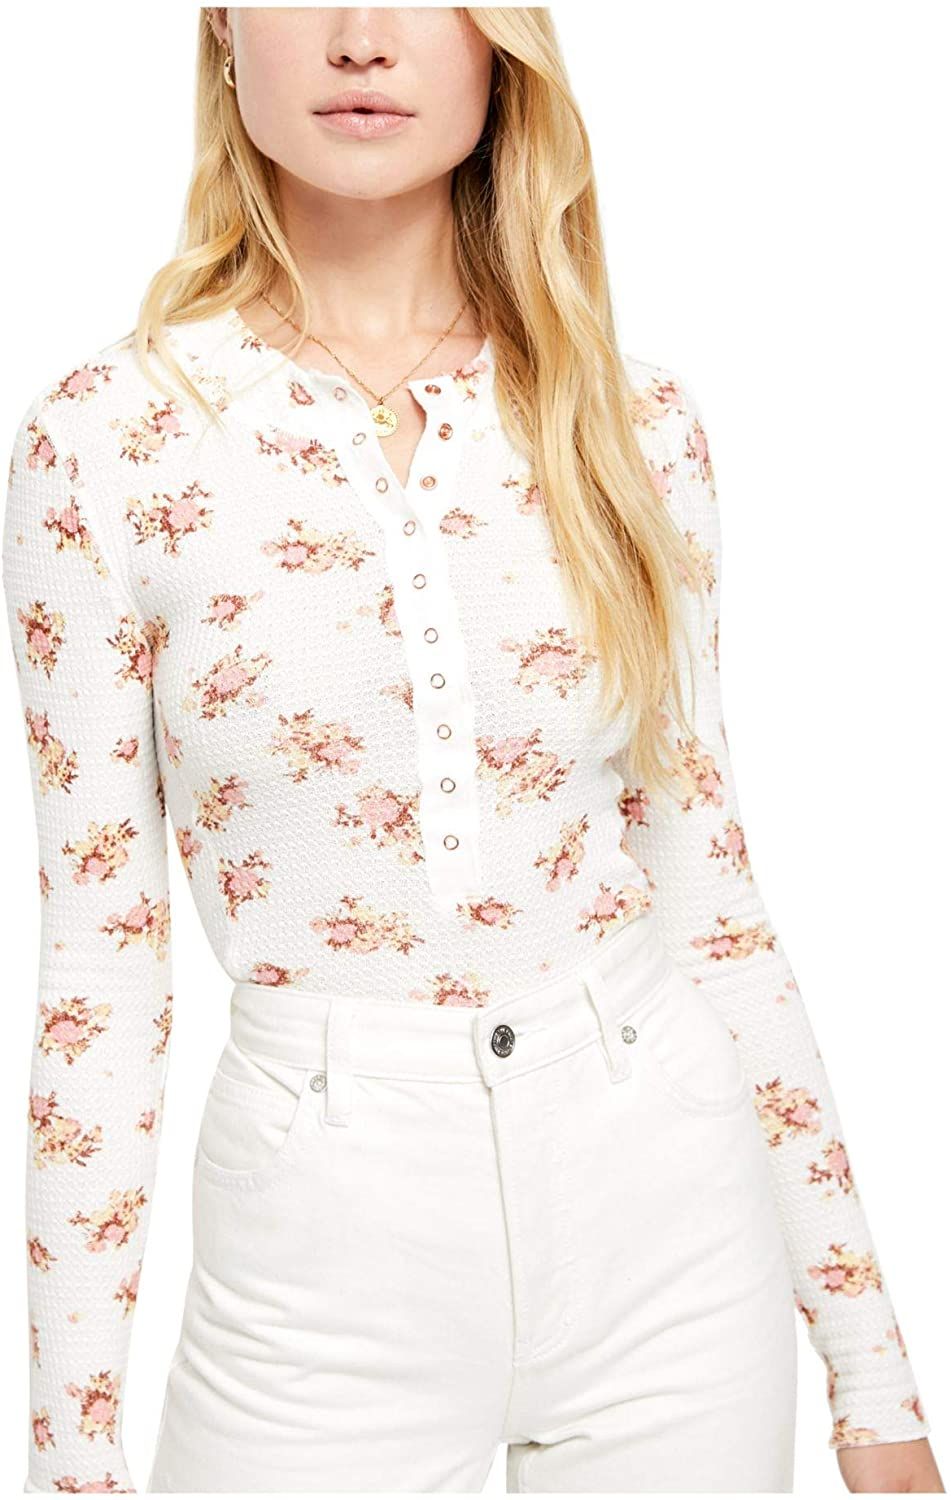 Color: Whites Size Type: Regular Size (Women's): L Sleeve Length: Long Sleeve Type: T-Shirt Style: Knit Top Neckline: Round Neck Pattern: Floral Theme: Colorful Material: Rayon